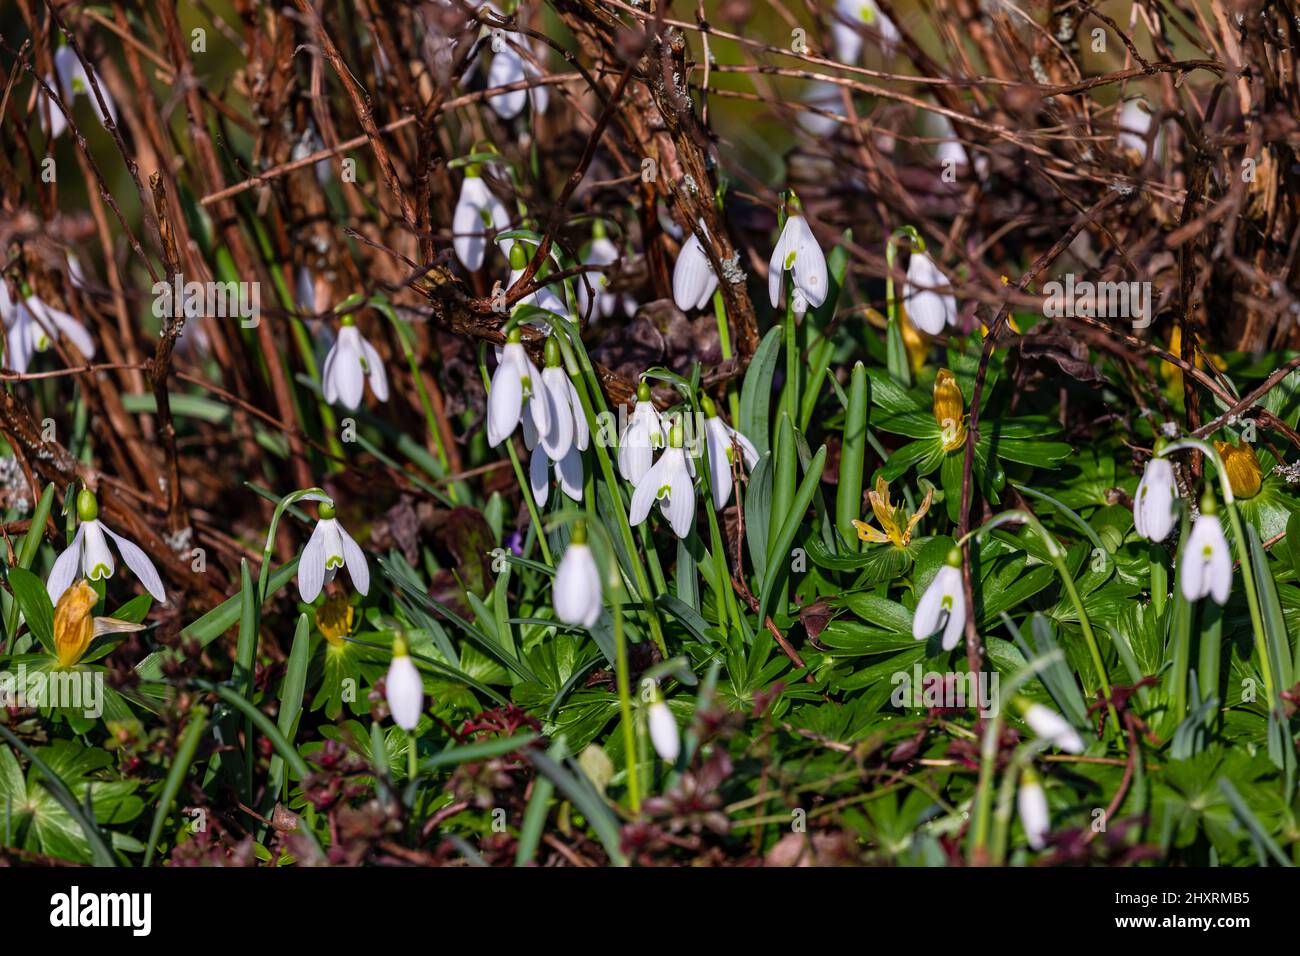 Nice and friendly snowdrop flowers are a symbol for spring and rising temperatures Stock Photo